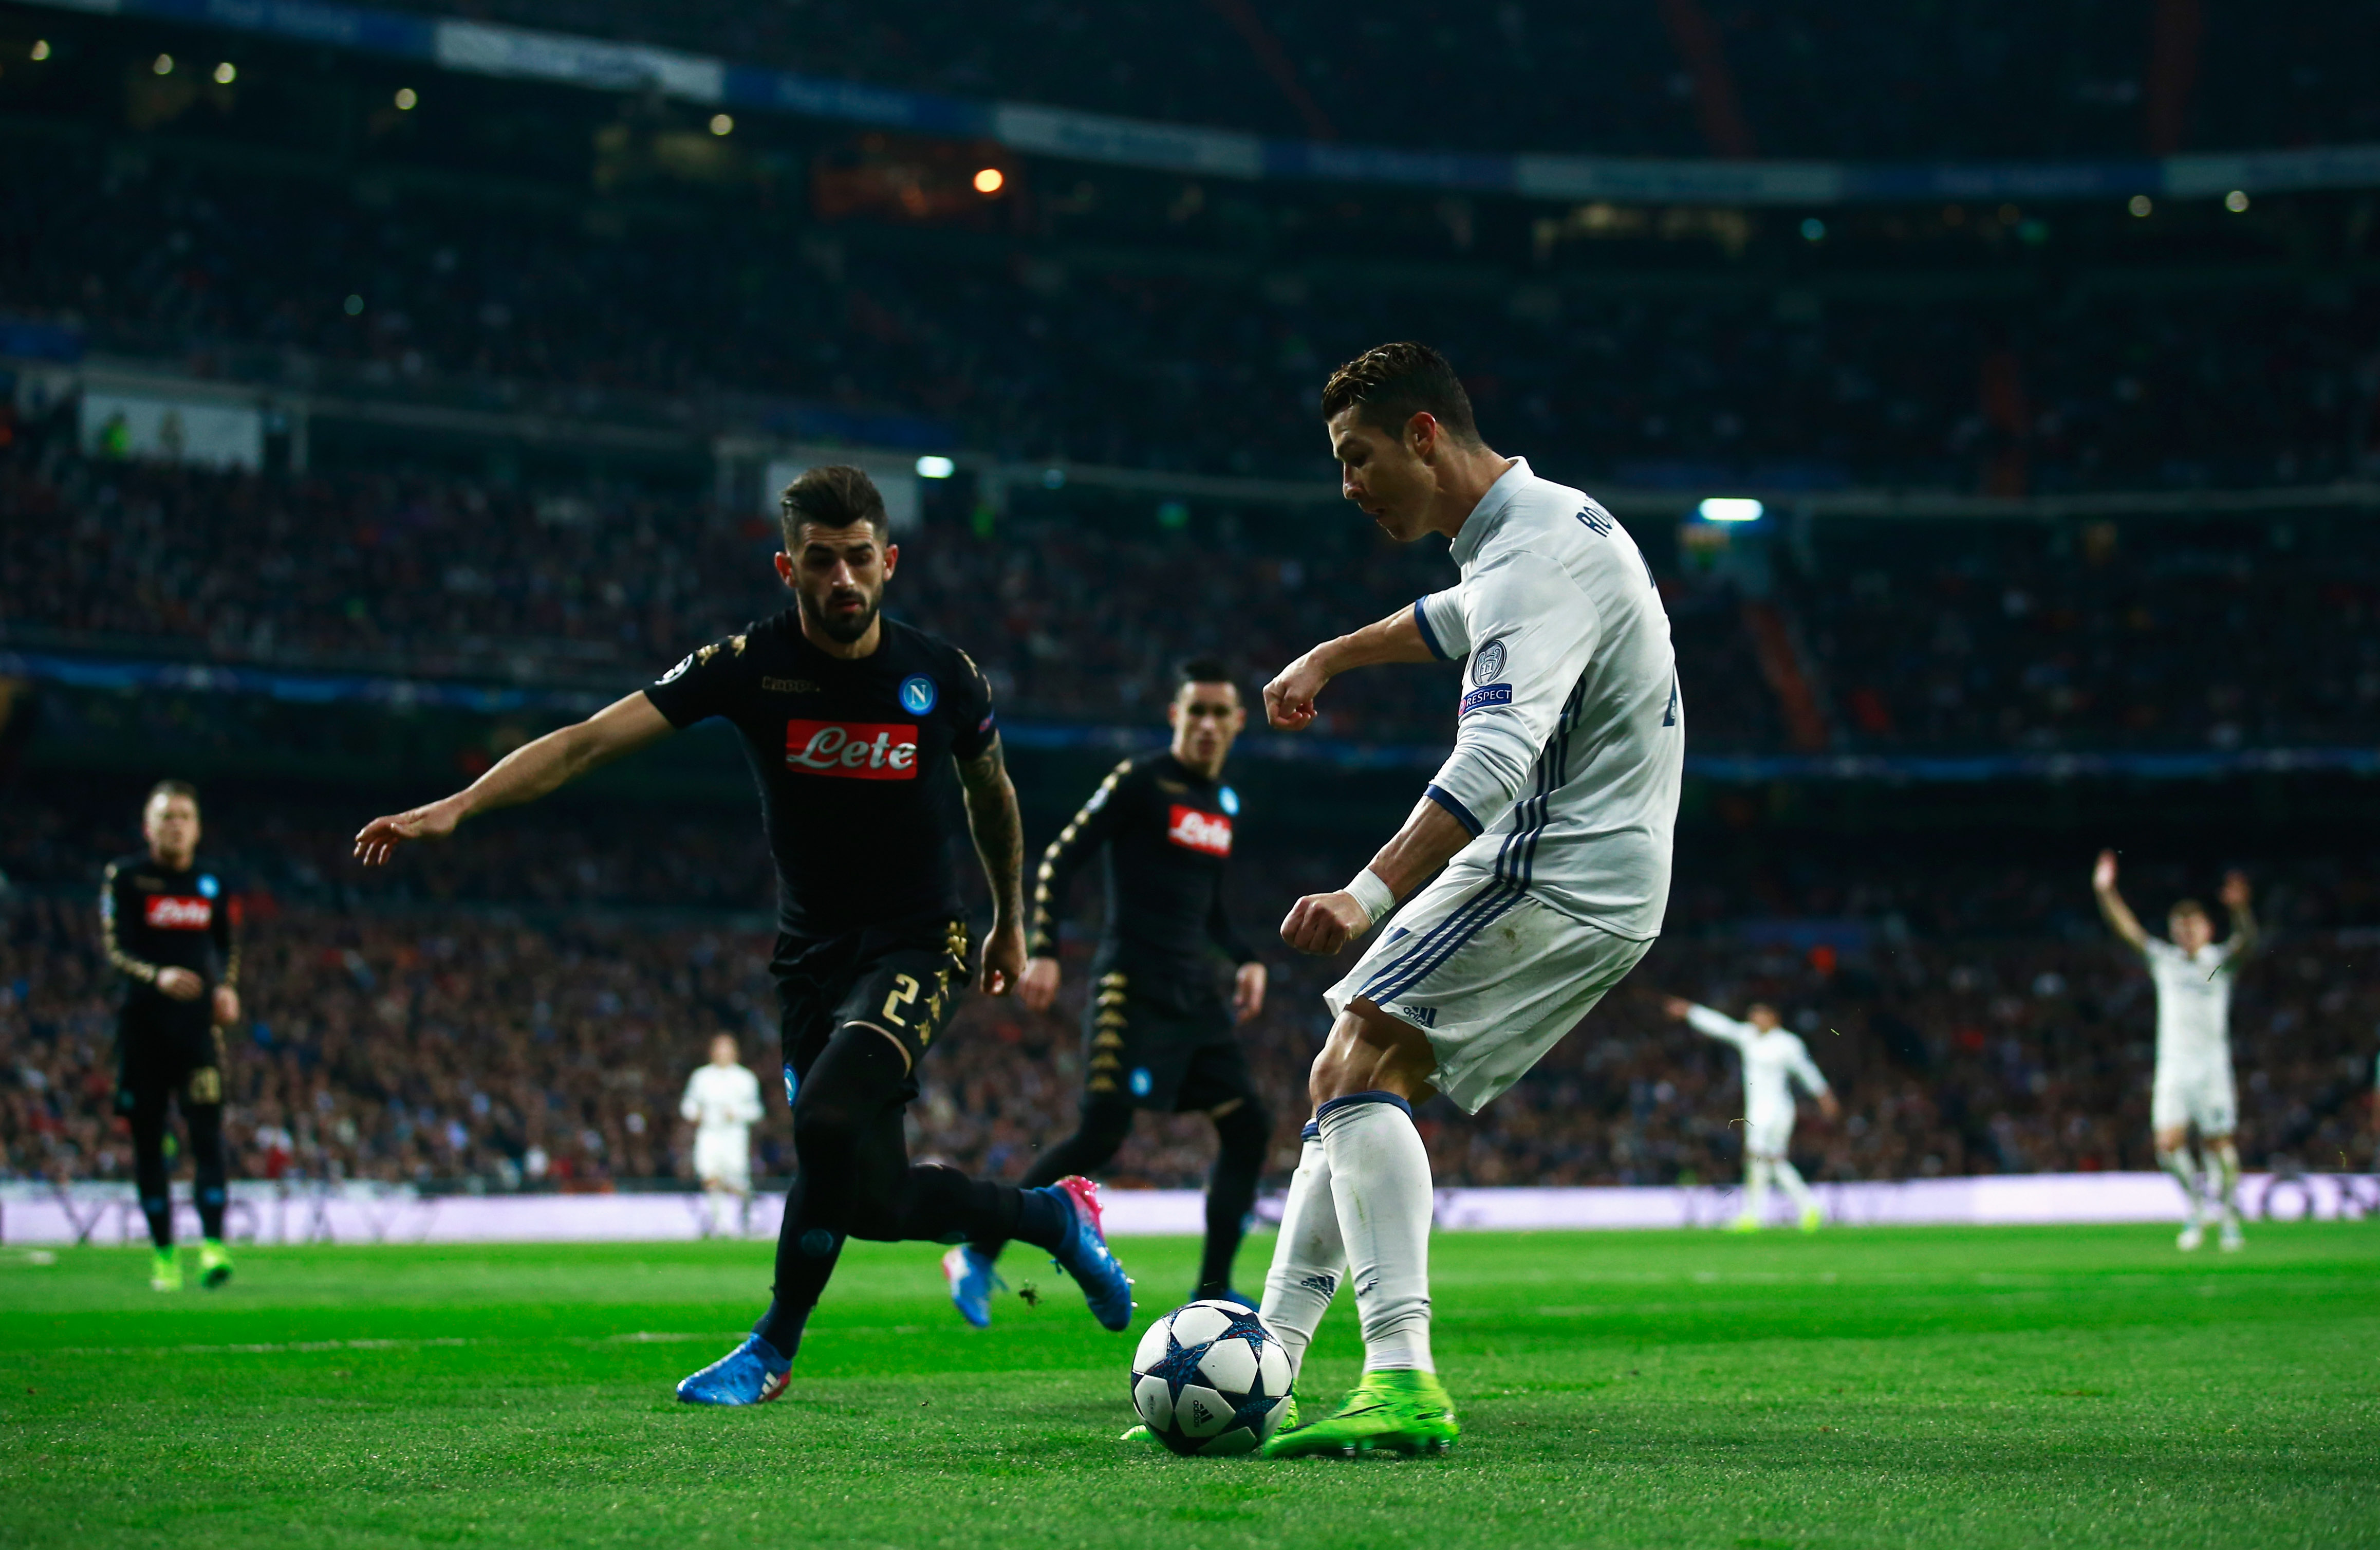 Real Madrid CF v SSC Napoli - UEFA Champions League Round of 16: First Leg